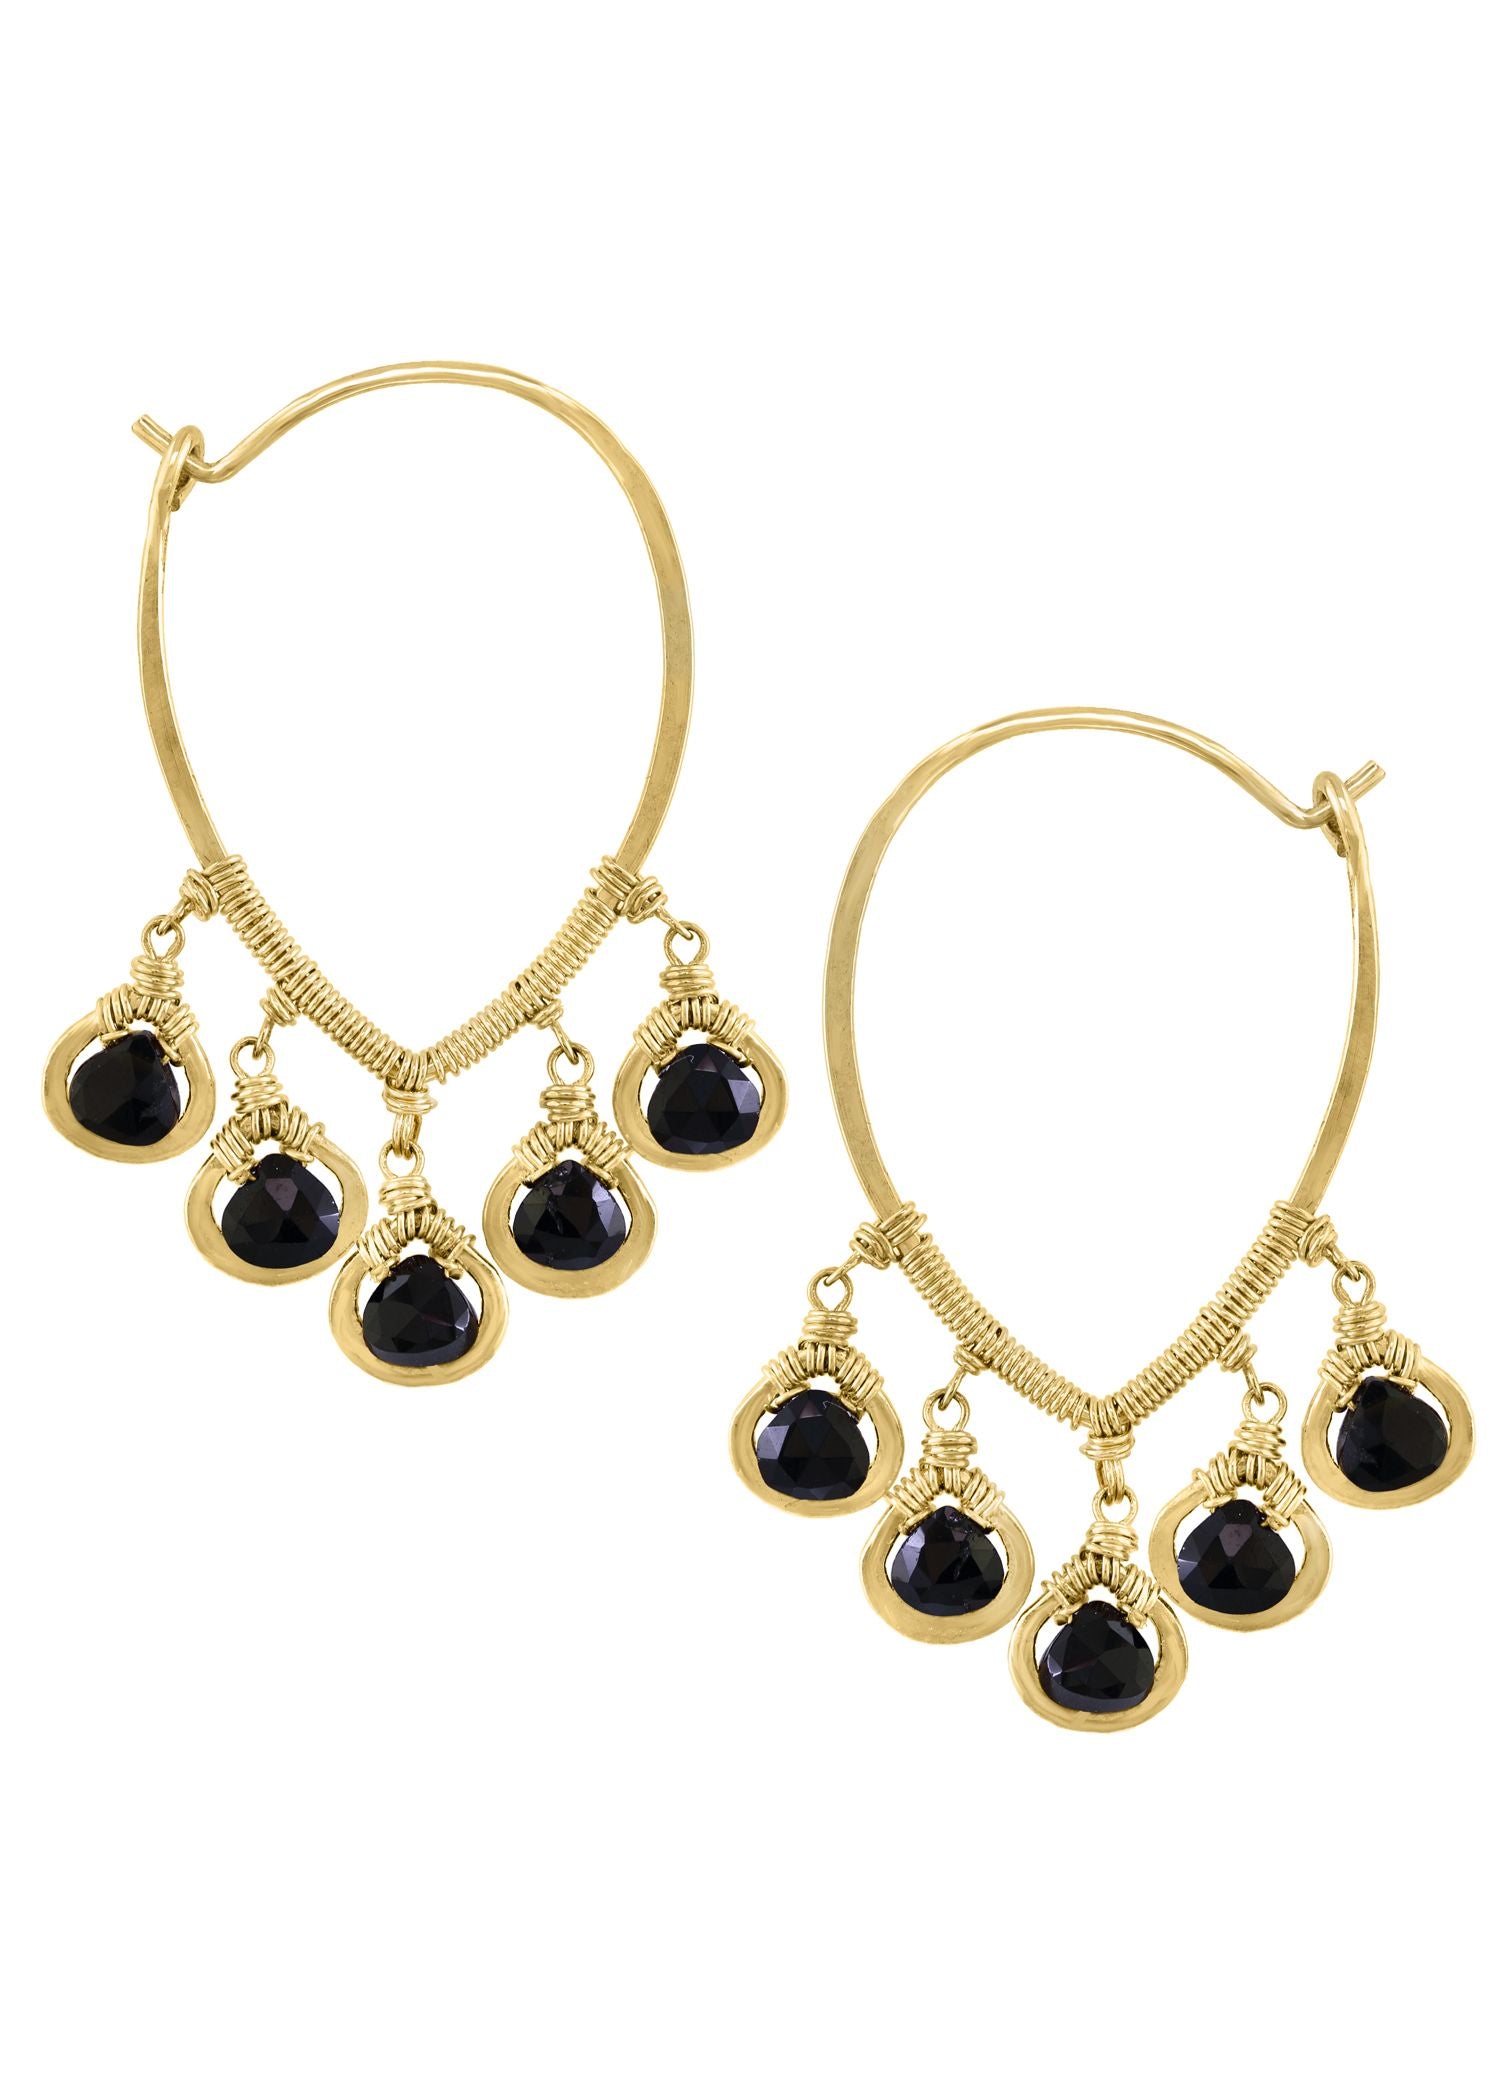 Black spinel 14k gold fill Earrings measure 1-7/16" in length and 1-1/16" in width Handmade in our Los Angeles studio